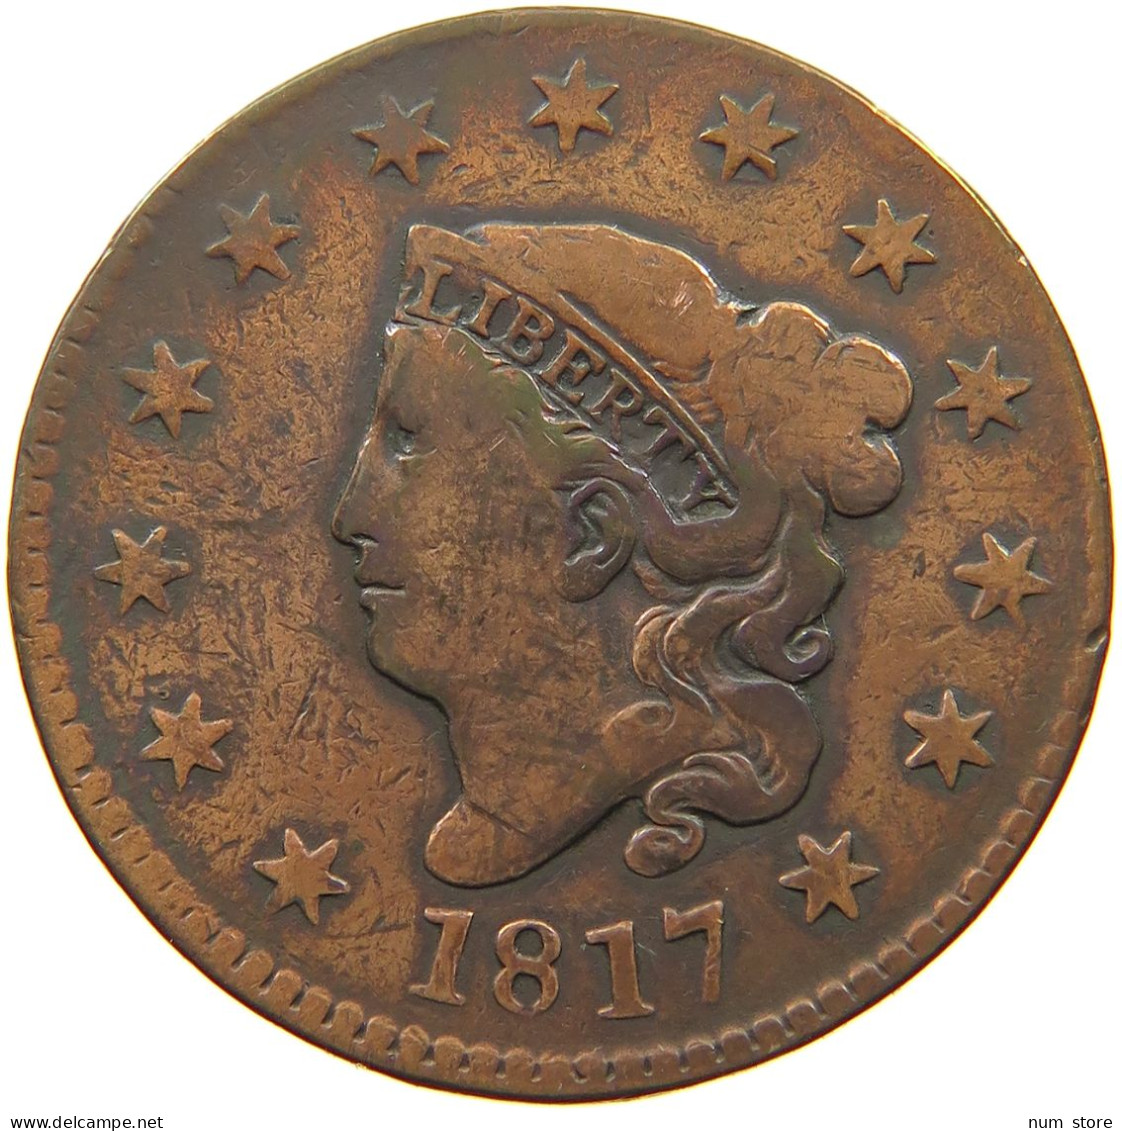 UNITED STATES OF AMERICA LARGE CENT 1817 CORONET HEAD #t141 0321 - 1816-1839: Coronet Head (Tête Couronnée)